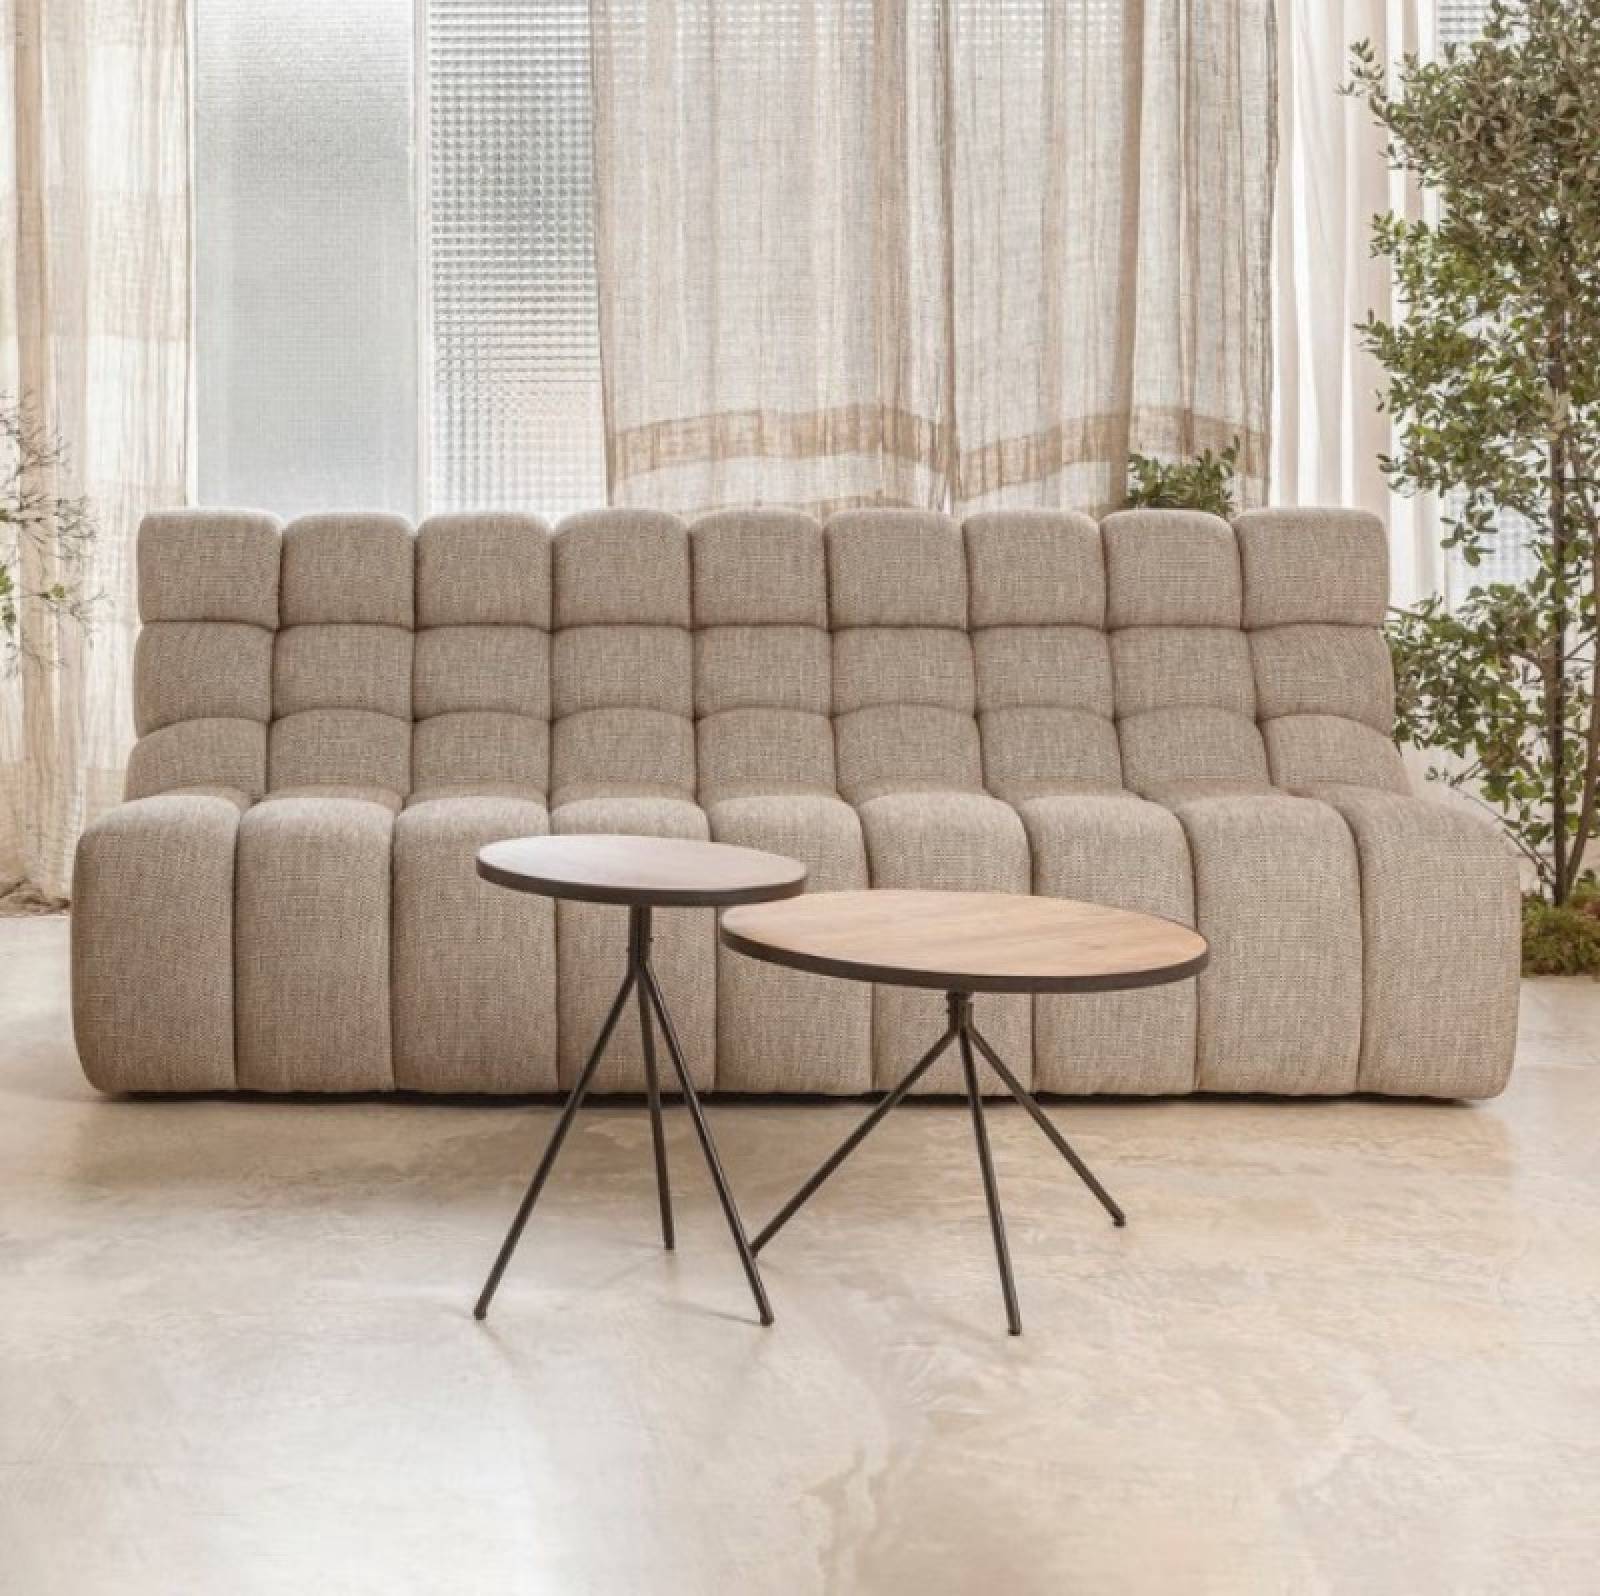 The Seville - 4 Seater Sofa